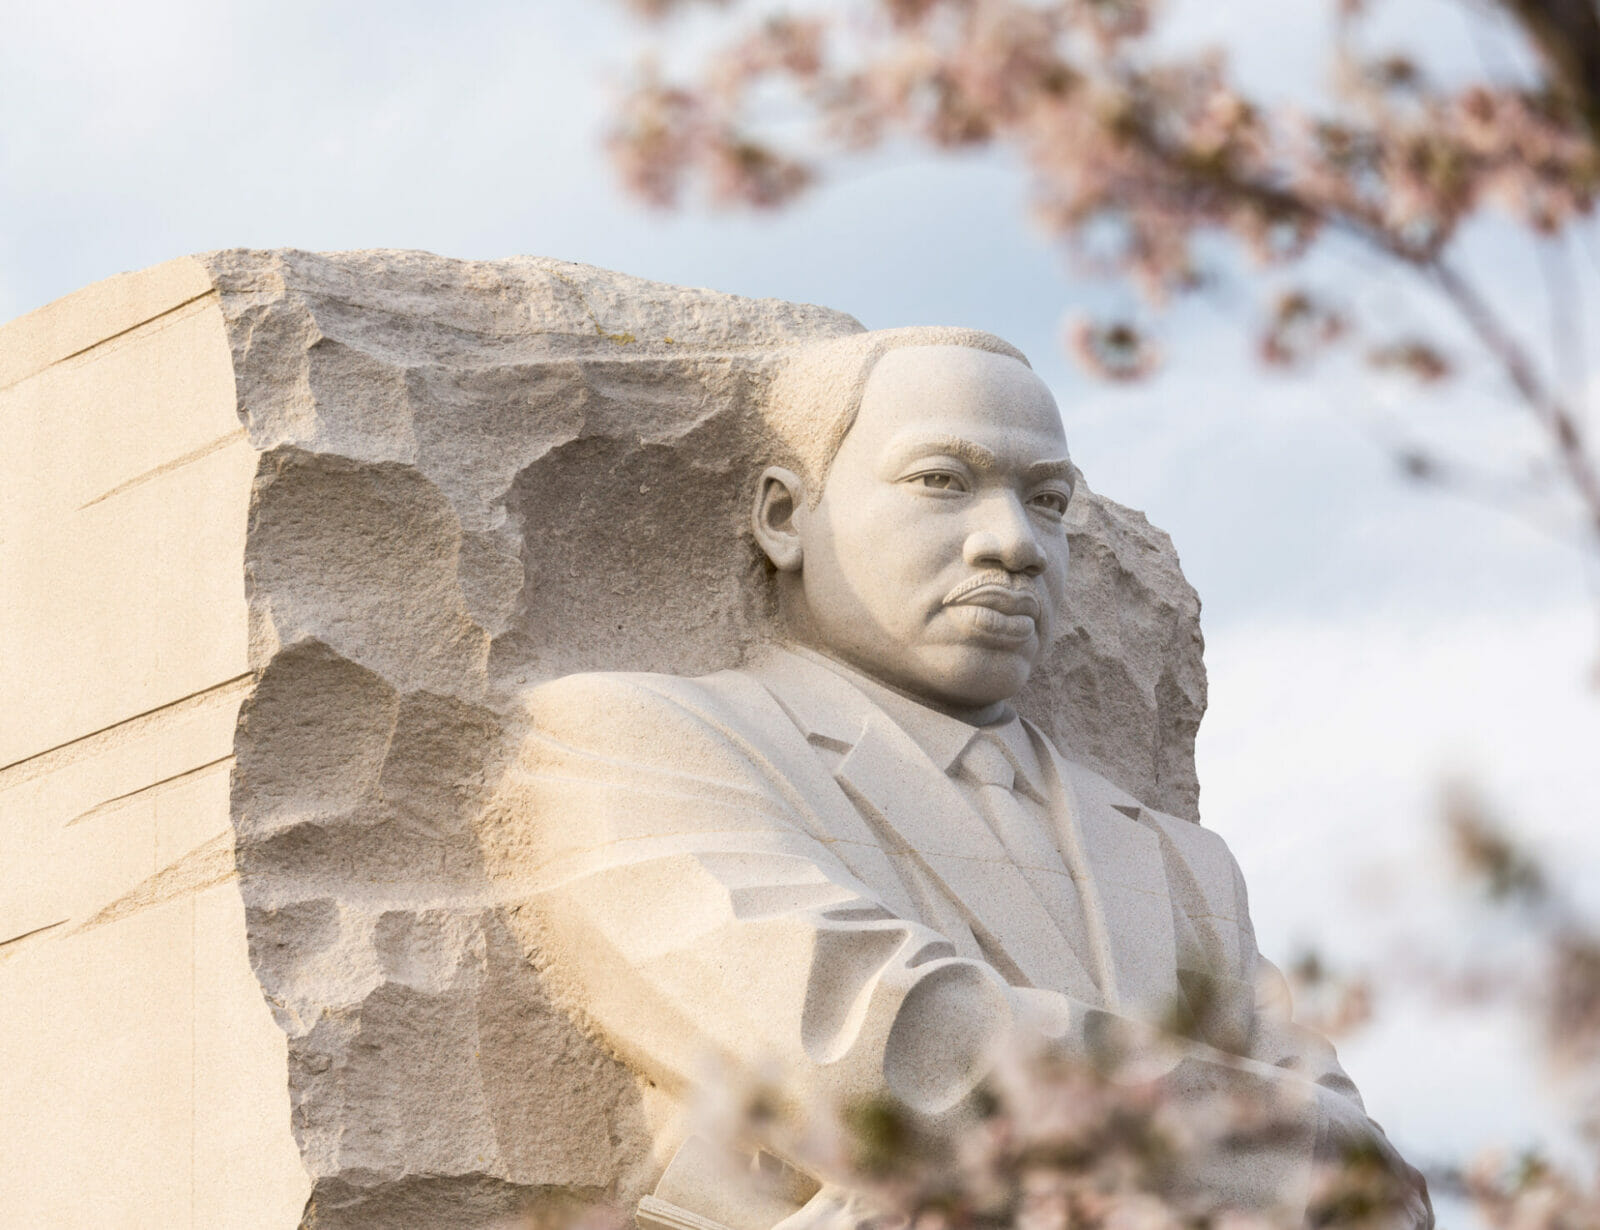 make a difference on MLK day